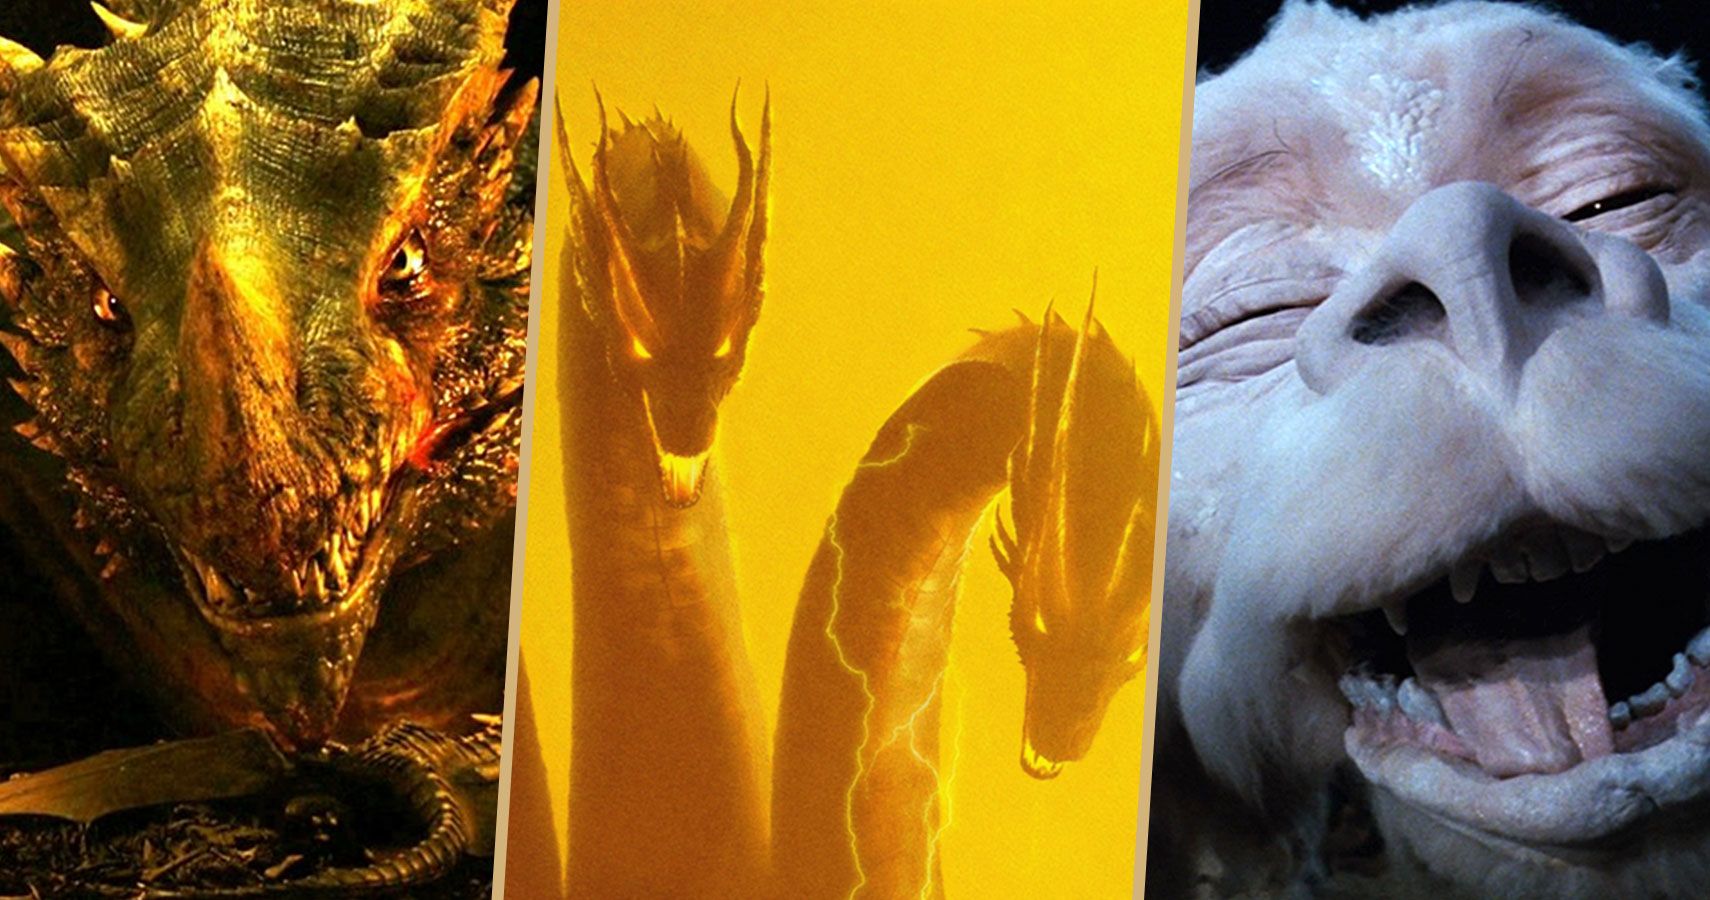 The Top 10 Coolest Dragons In Movies & TV Shows, Ranked